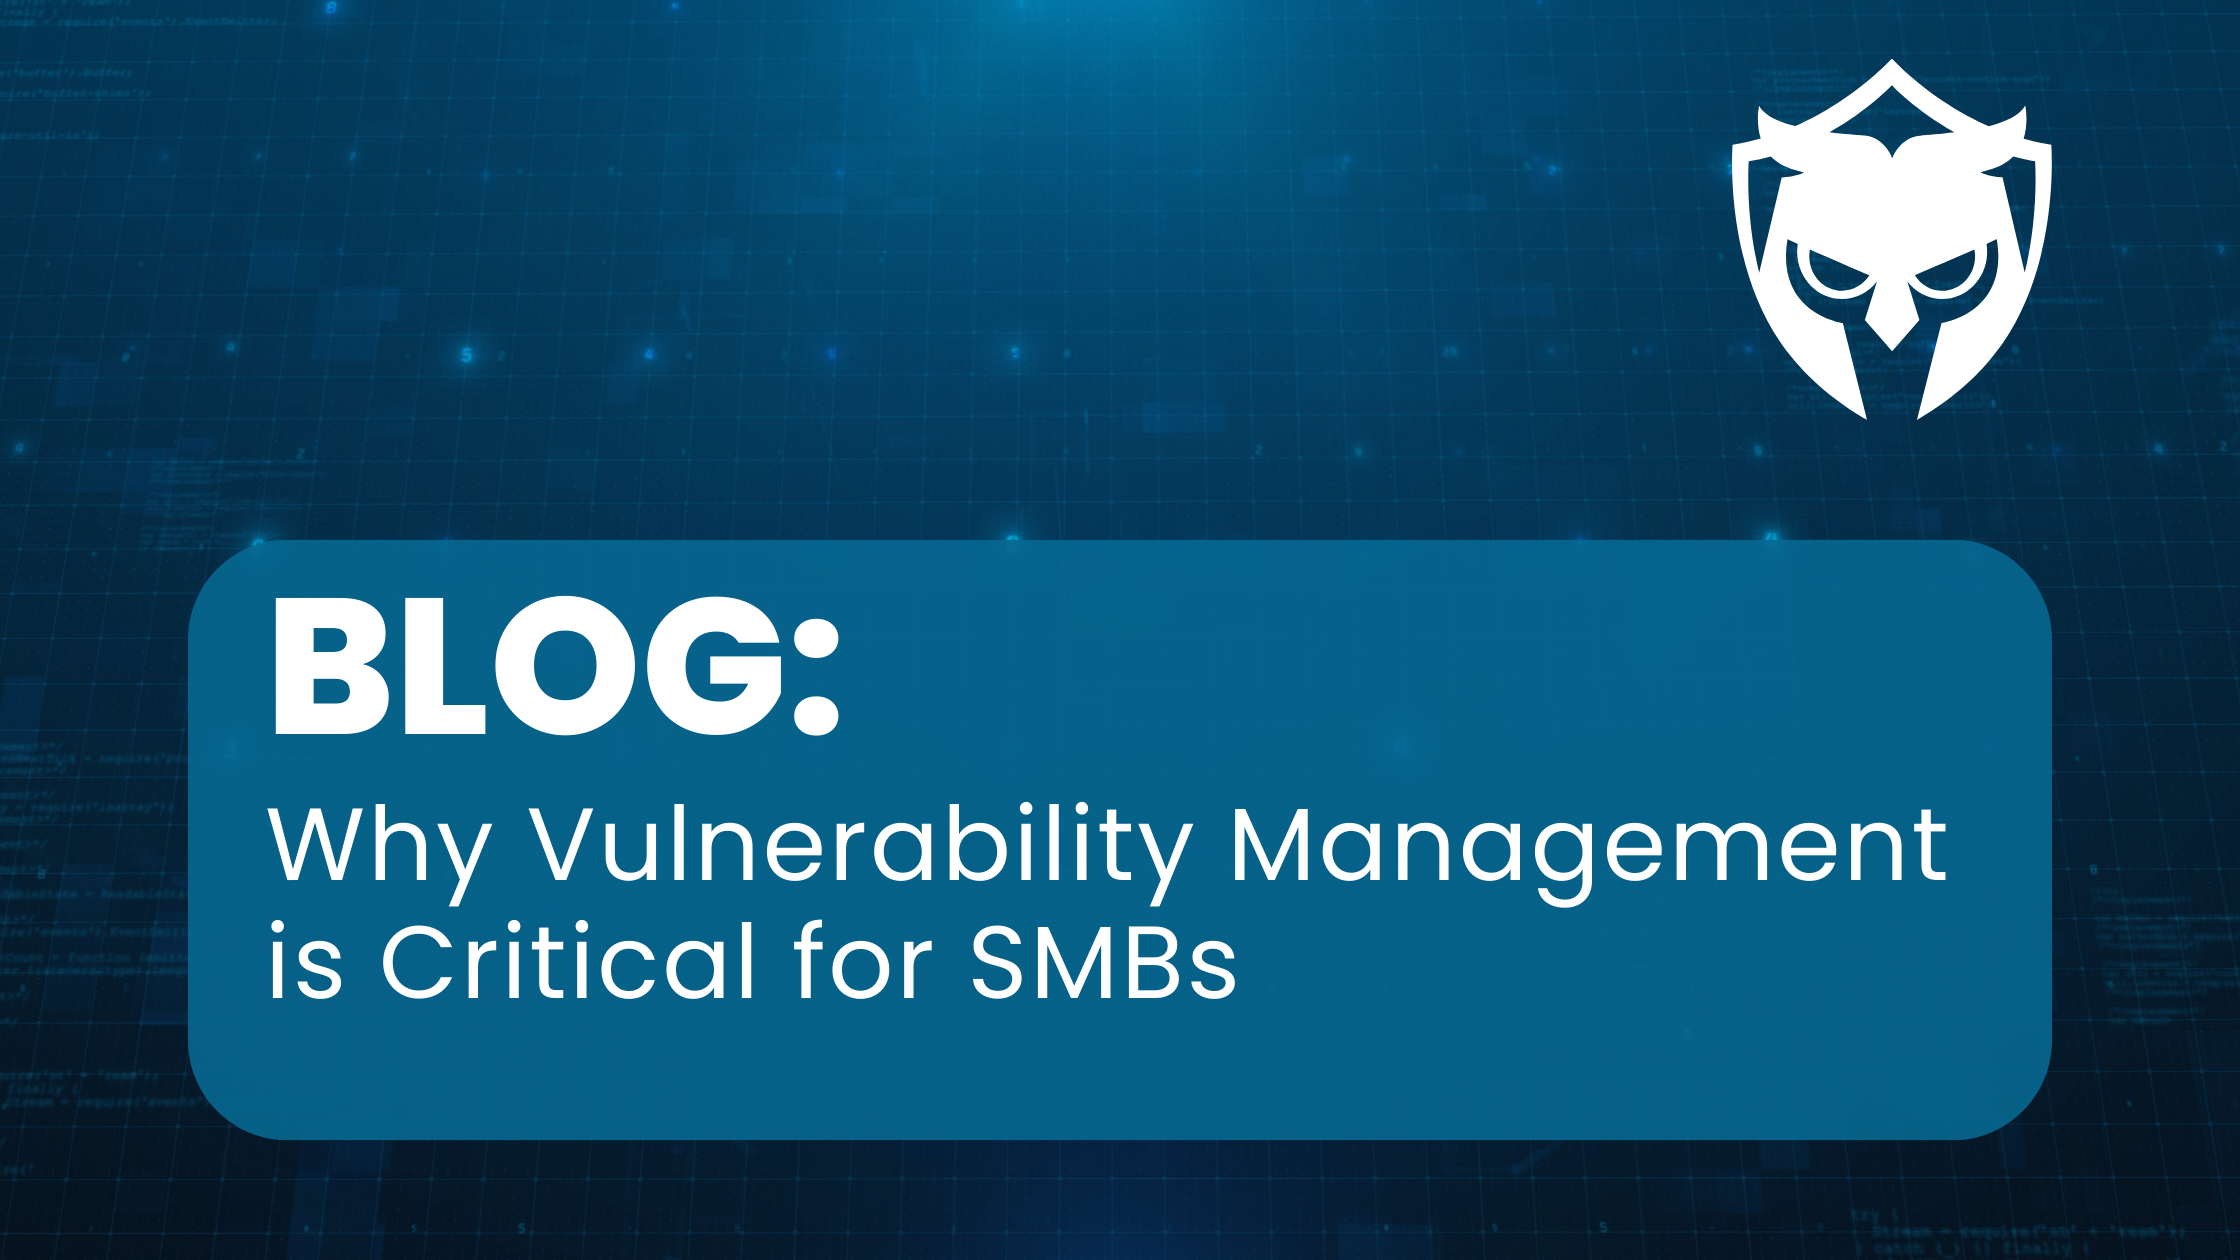 Why Vulnerability Management is Critical for SMBs